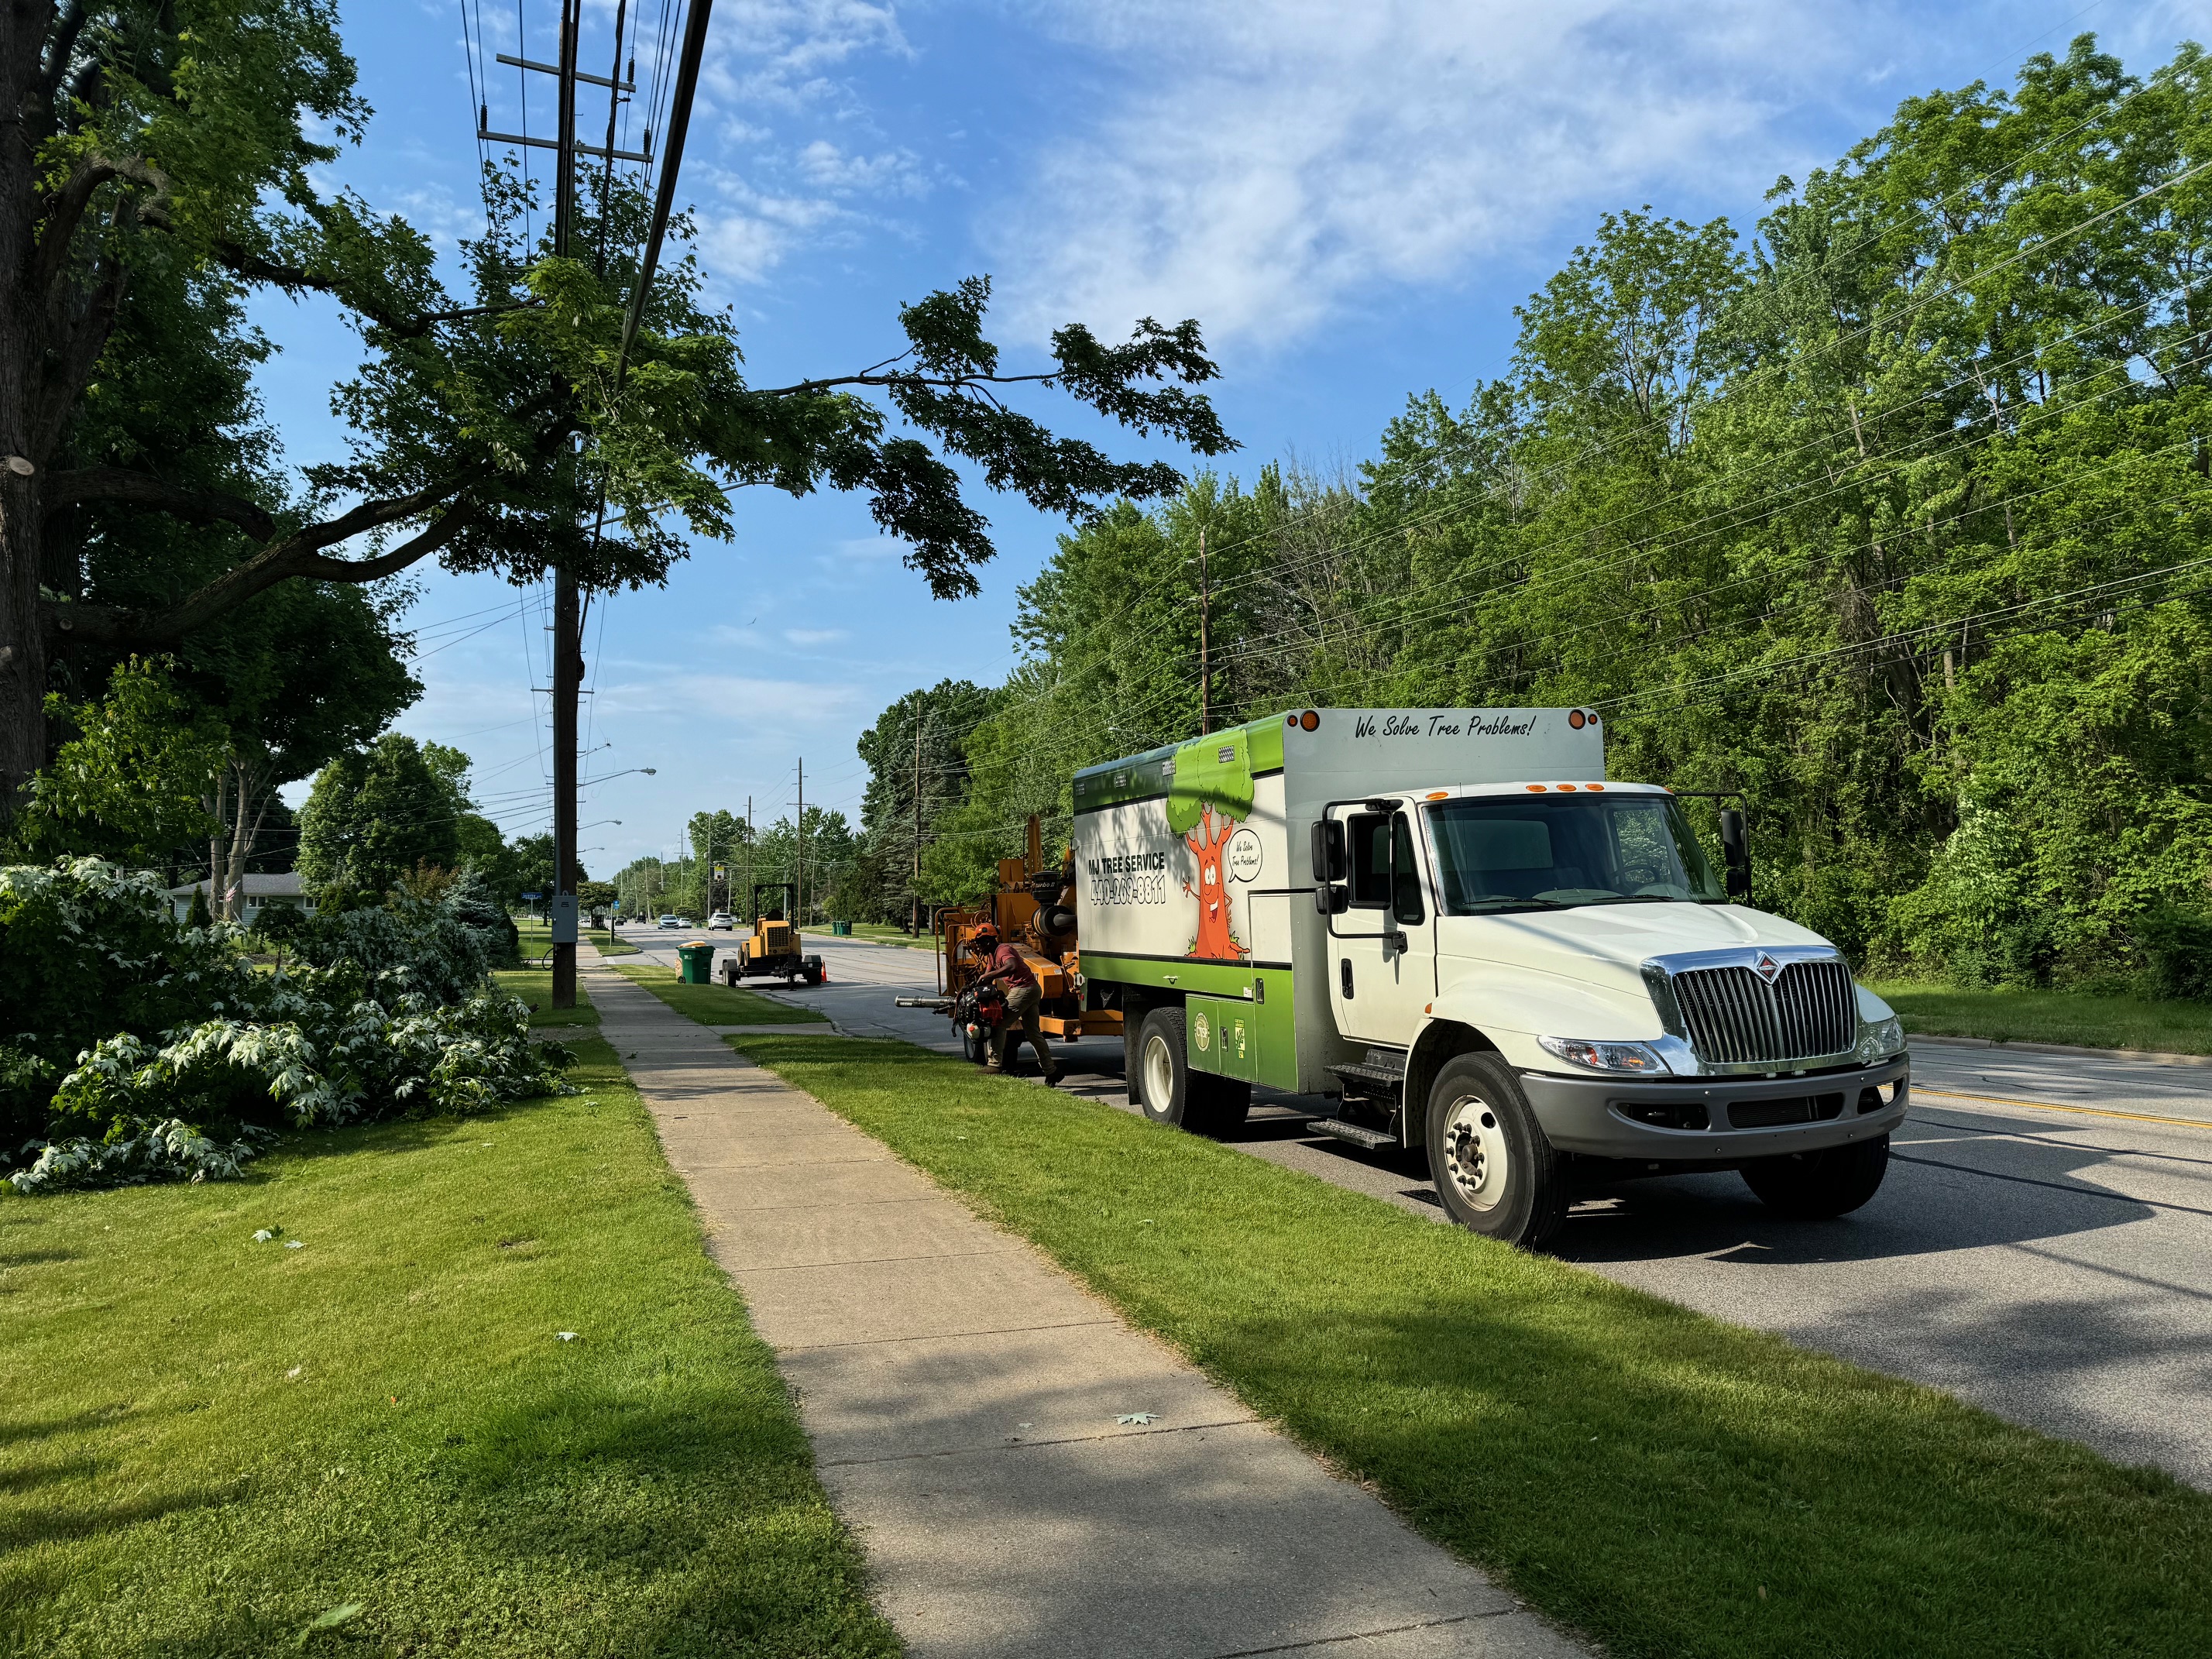 Hazardous tree removal by wires in Mentor, OH